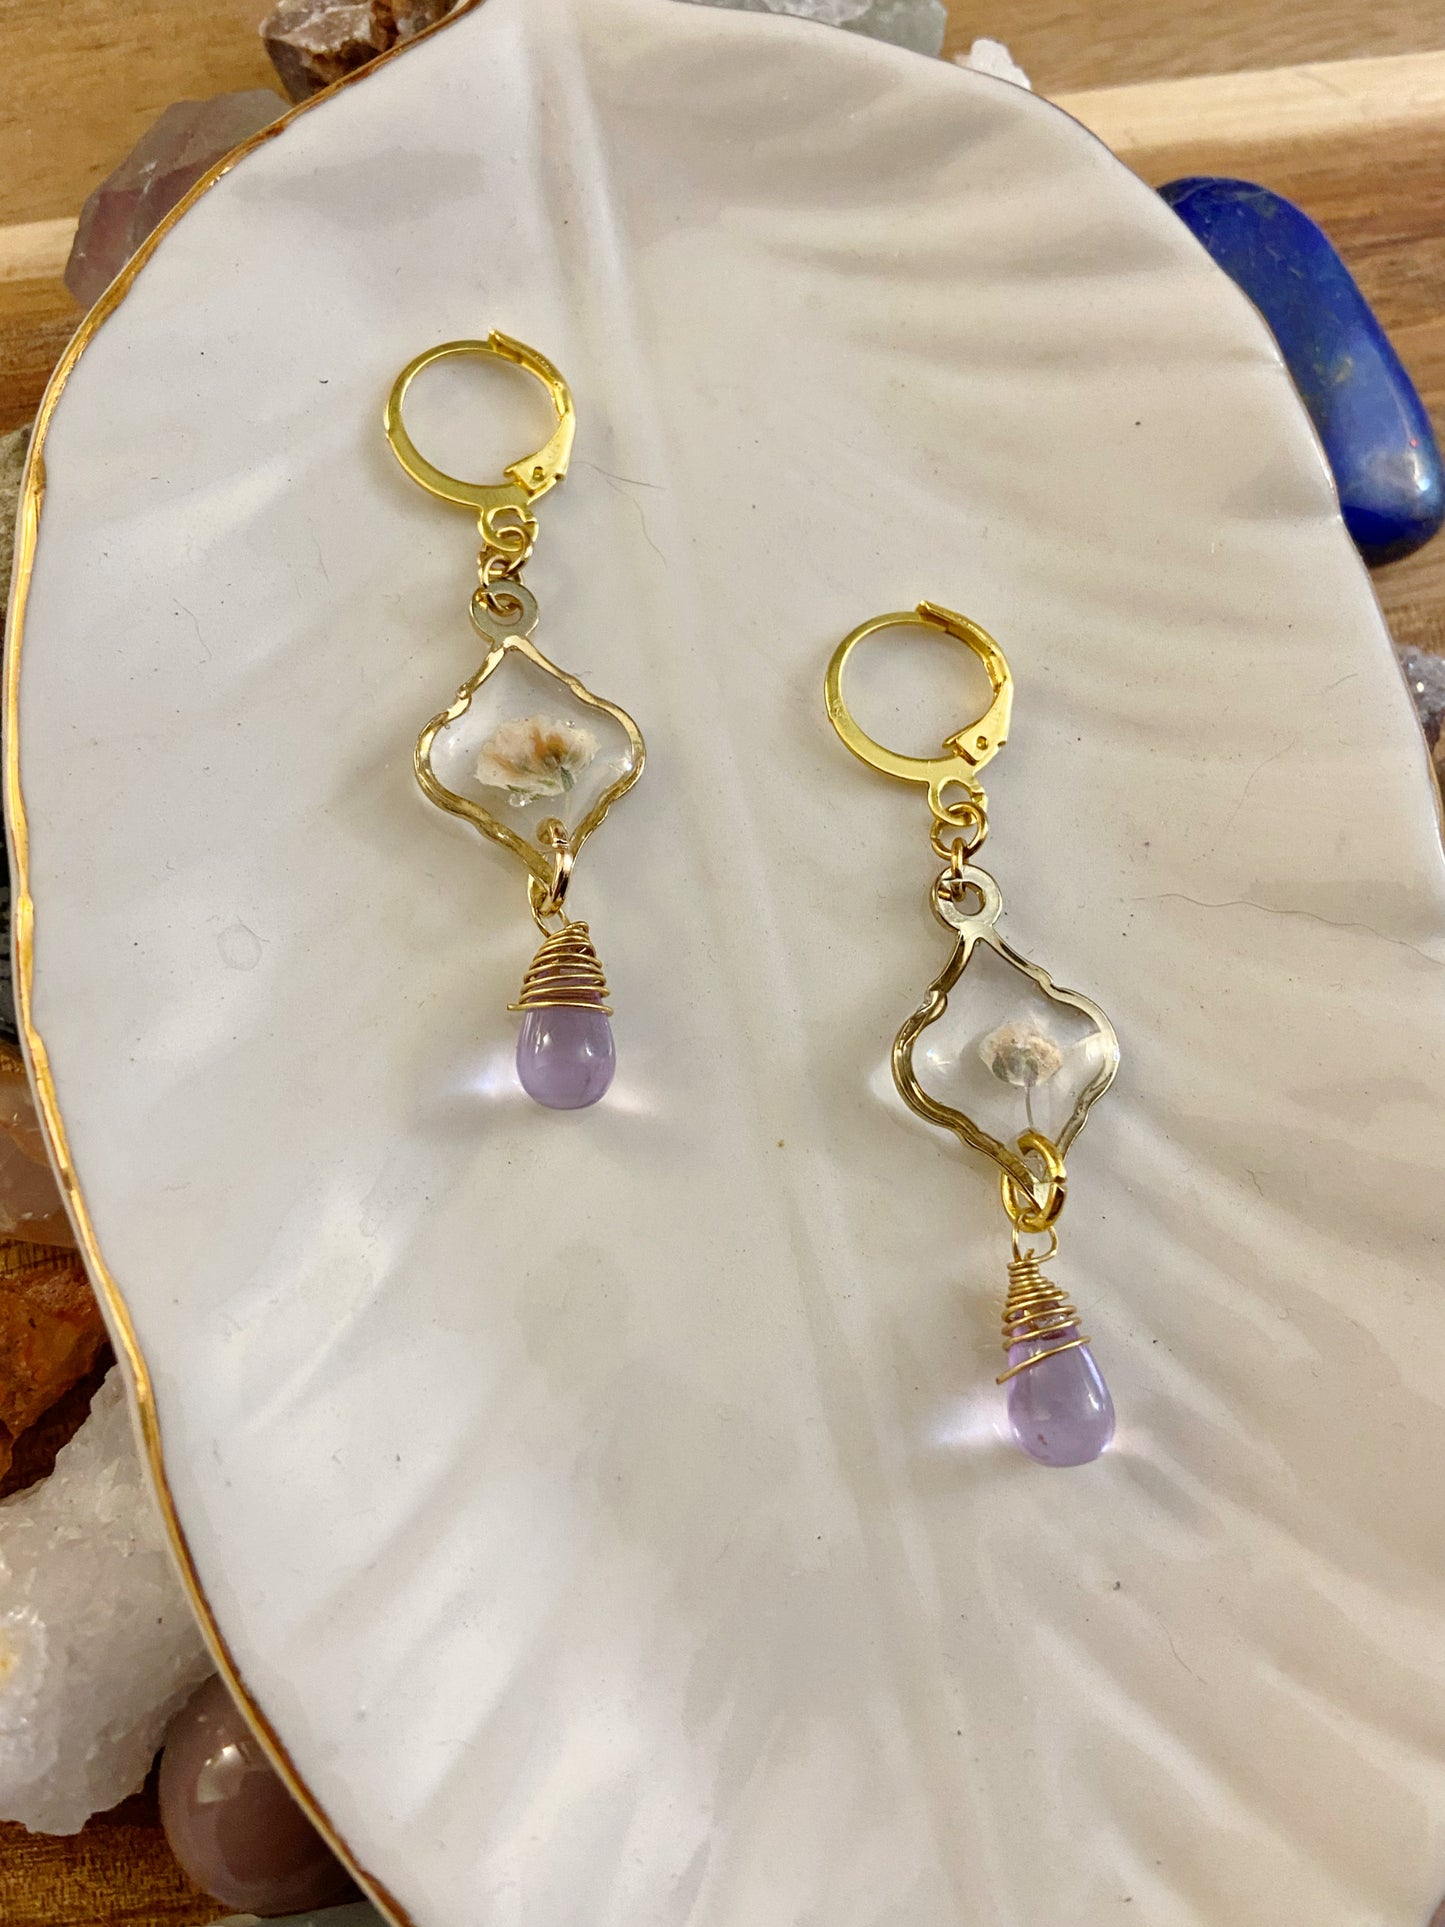 Baby's Breath - Real white pressed flowers inside moroccan tile shaped gold earrings with pale lavender teardrop glass beads